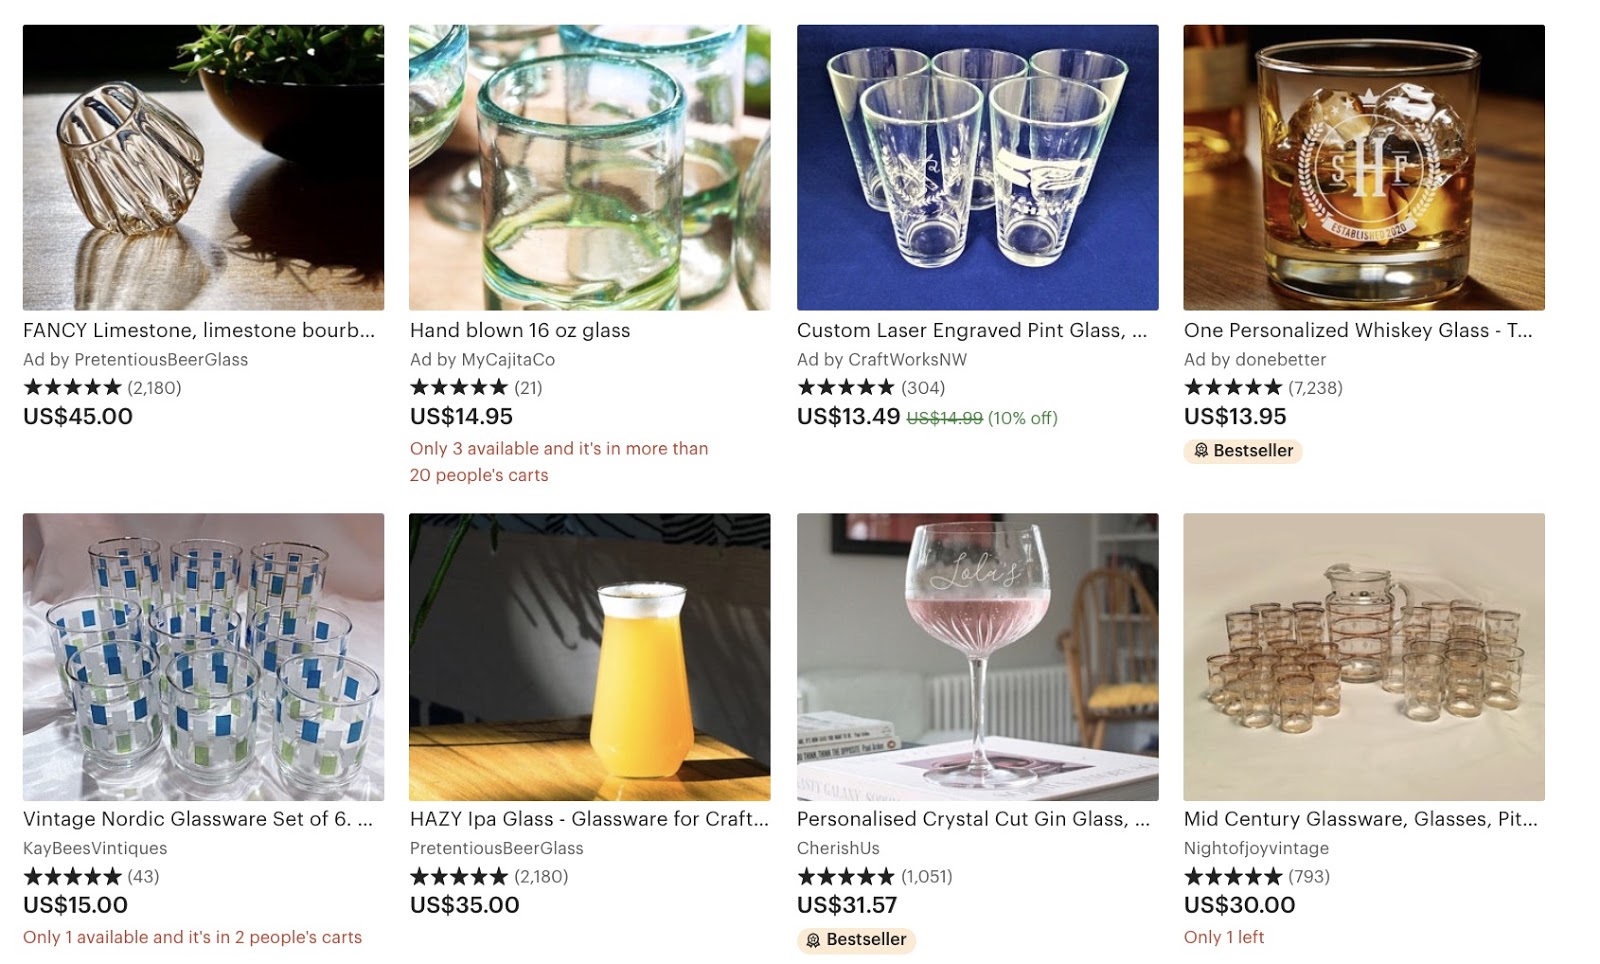 Selling glassware on Etsy